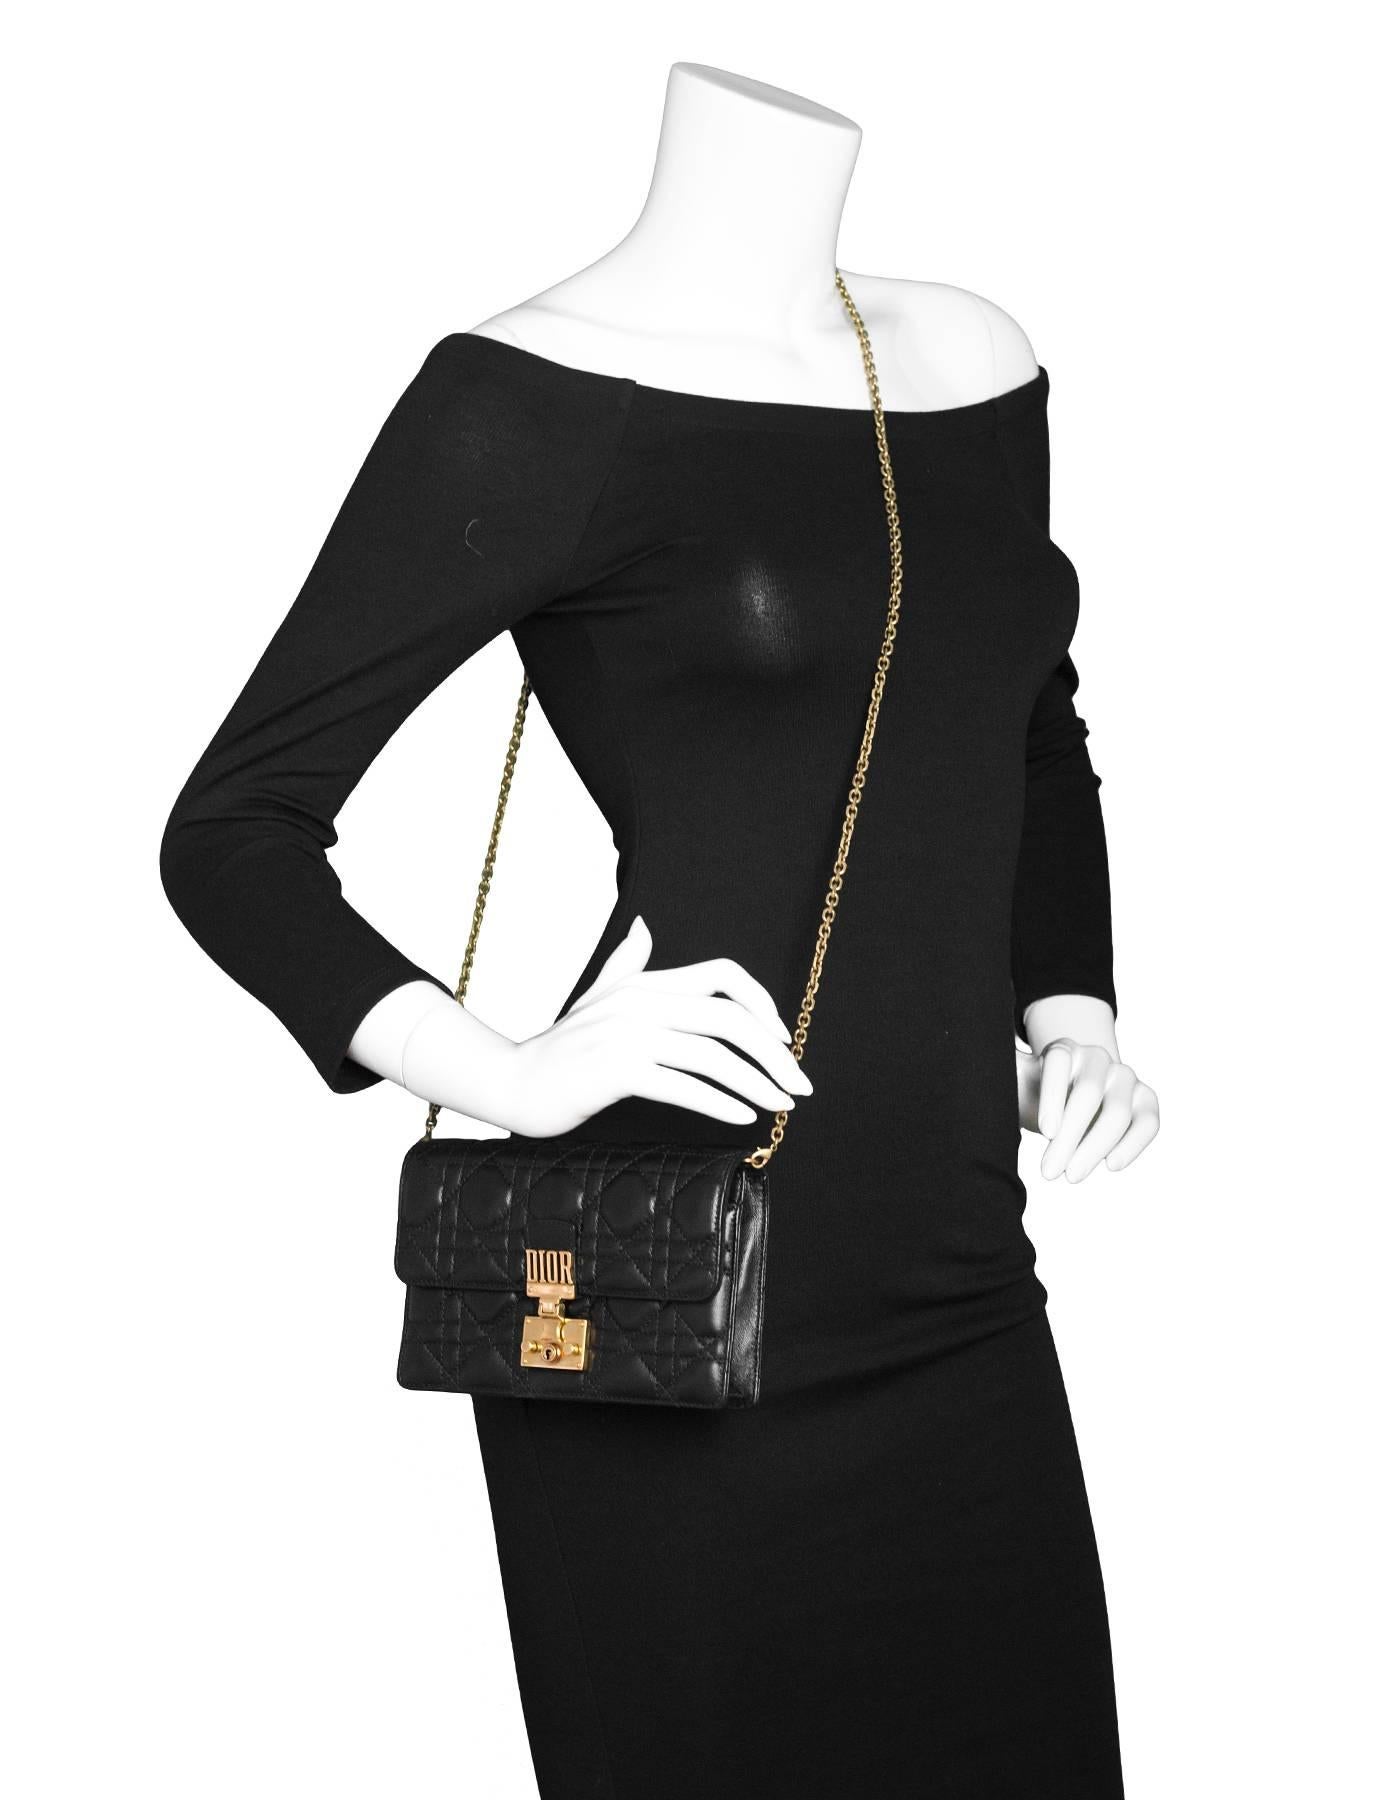 Christian Dior Black Leather Dioraddict Wallet On Chain Crossbody
Chain strap can be removed

Made In: Italy
Color: Black
Hardware: Goldtone
Materials: Leather, metal
Lining: Black suede
Closure/Opening: Flap top with oush lock closure
Exterior